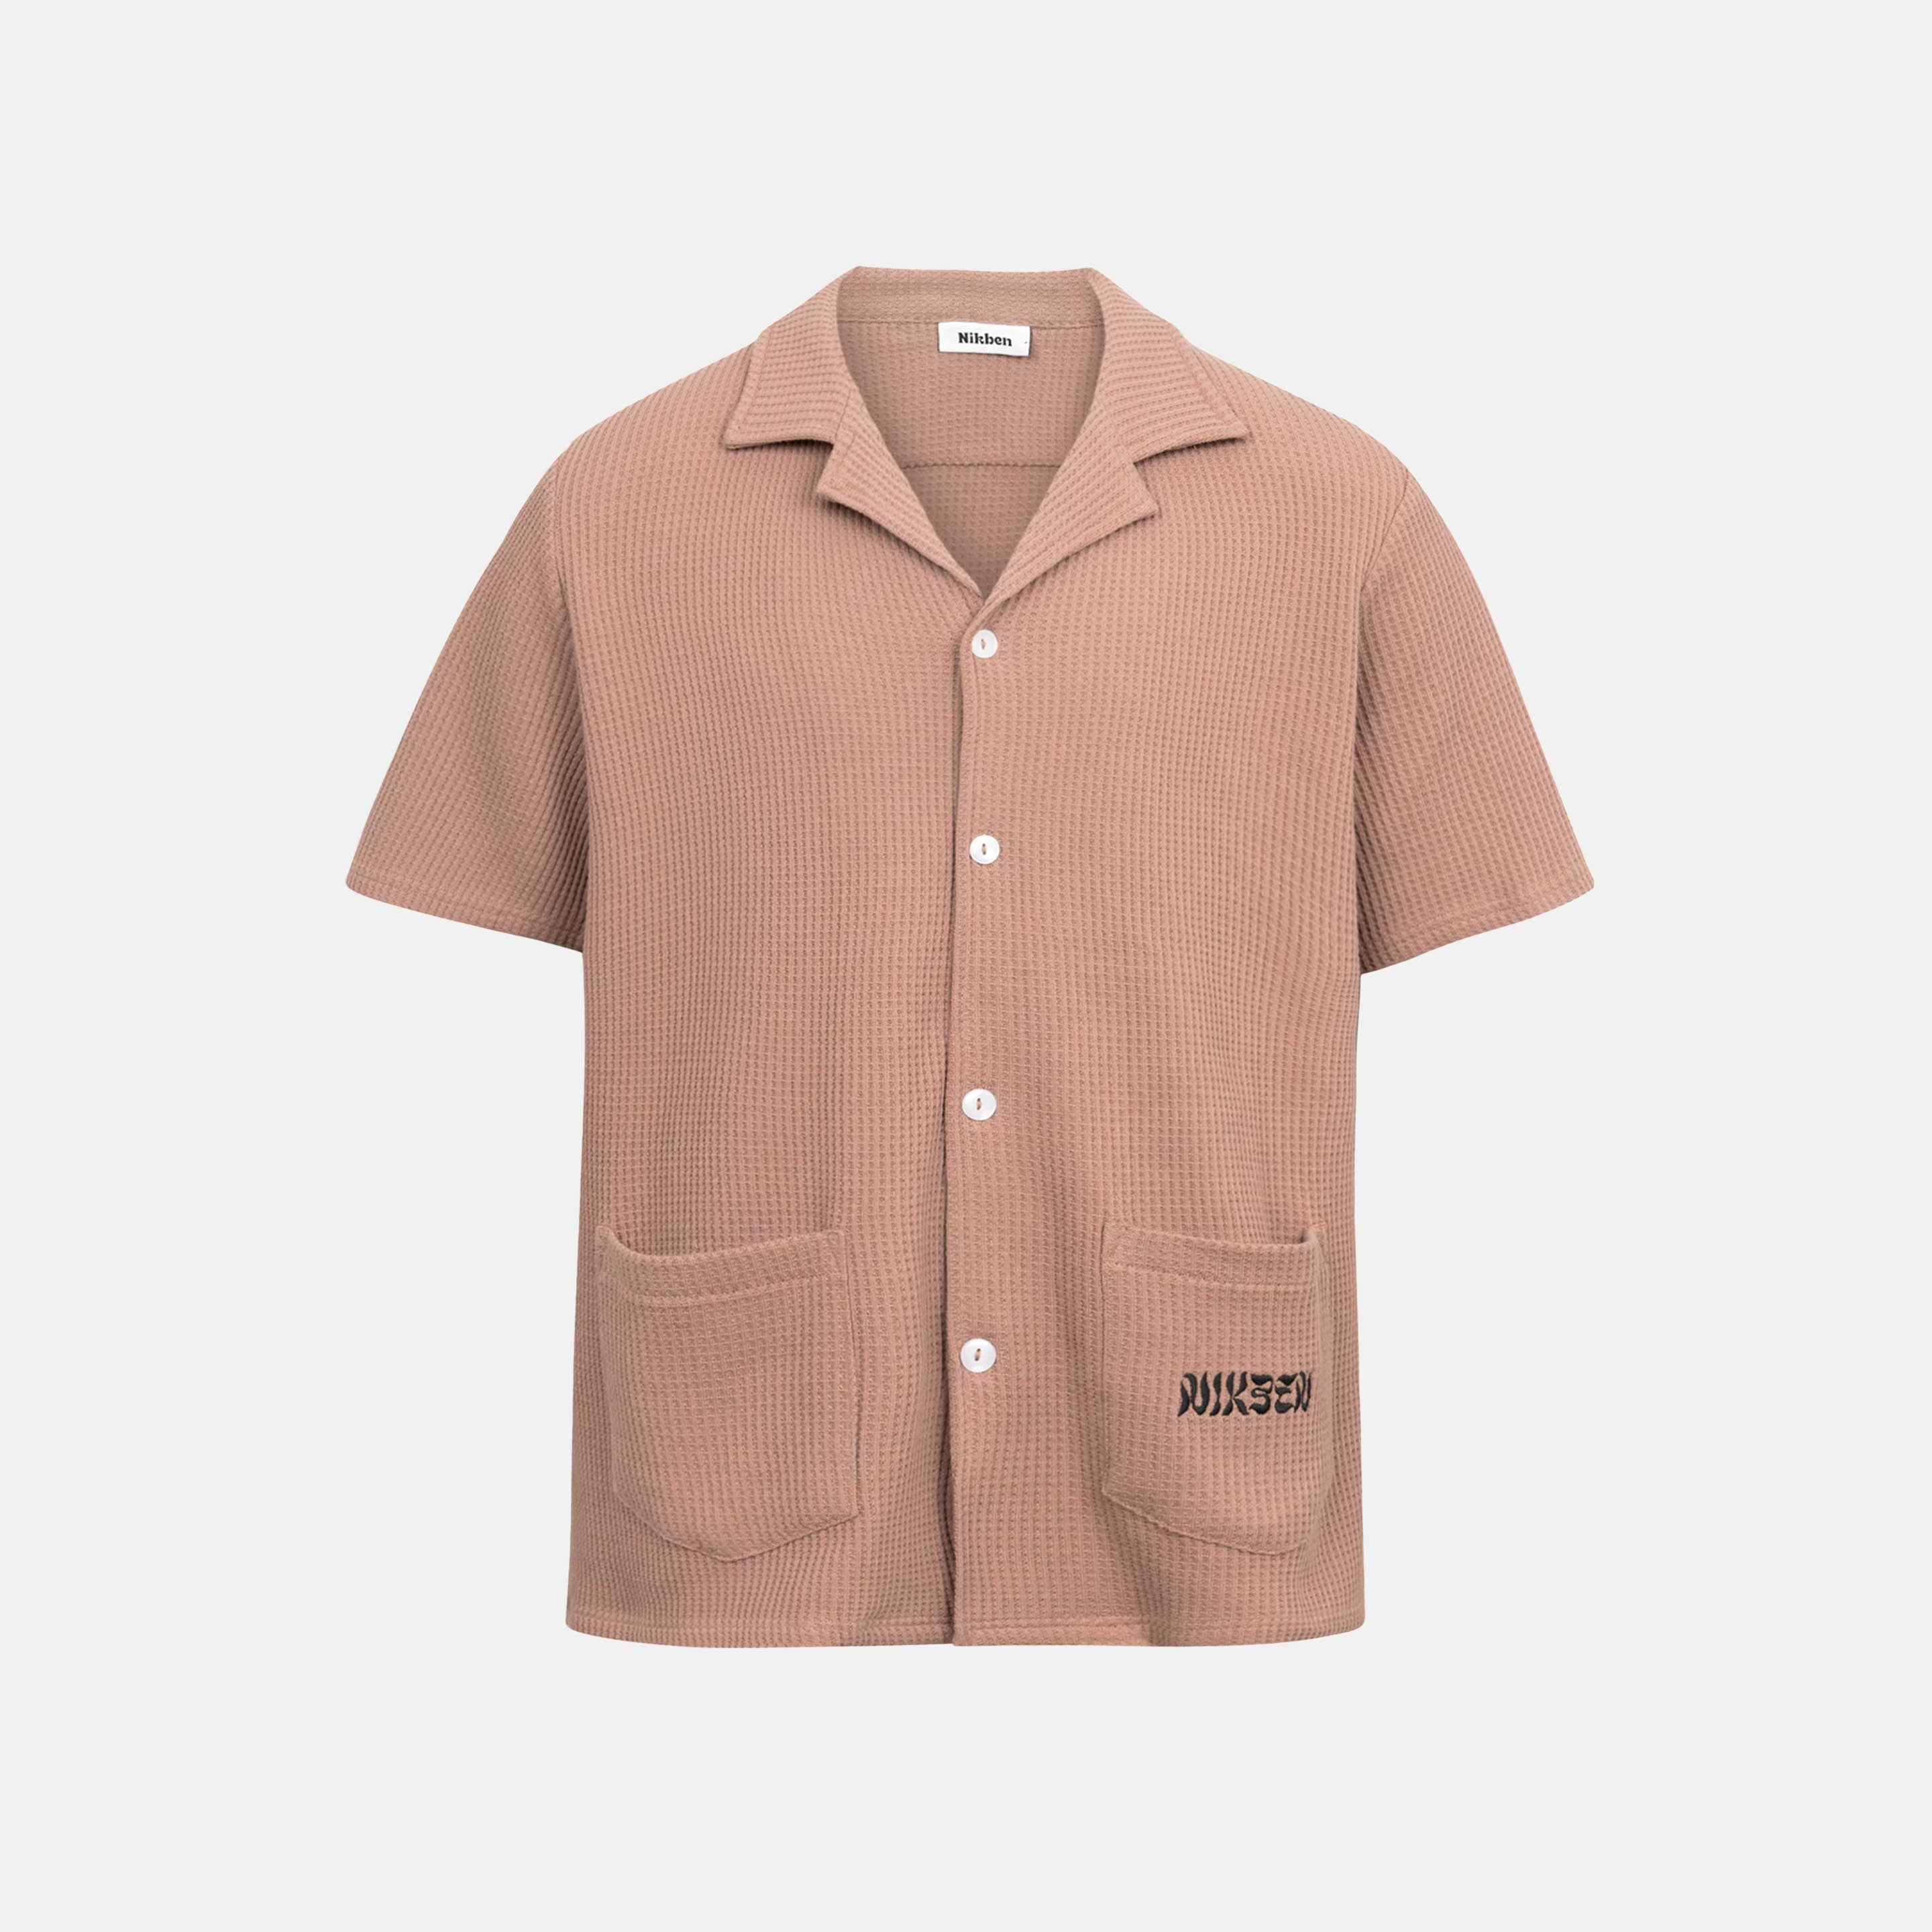 Brown waffle-patterned short-sleeved shirt with two front pockets, featuring a stitched black Nikben logo on the left pocket and button closure.